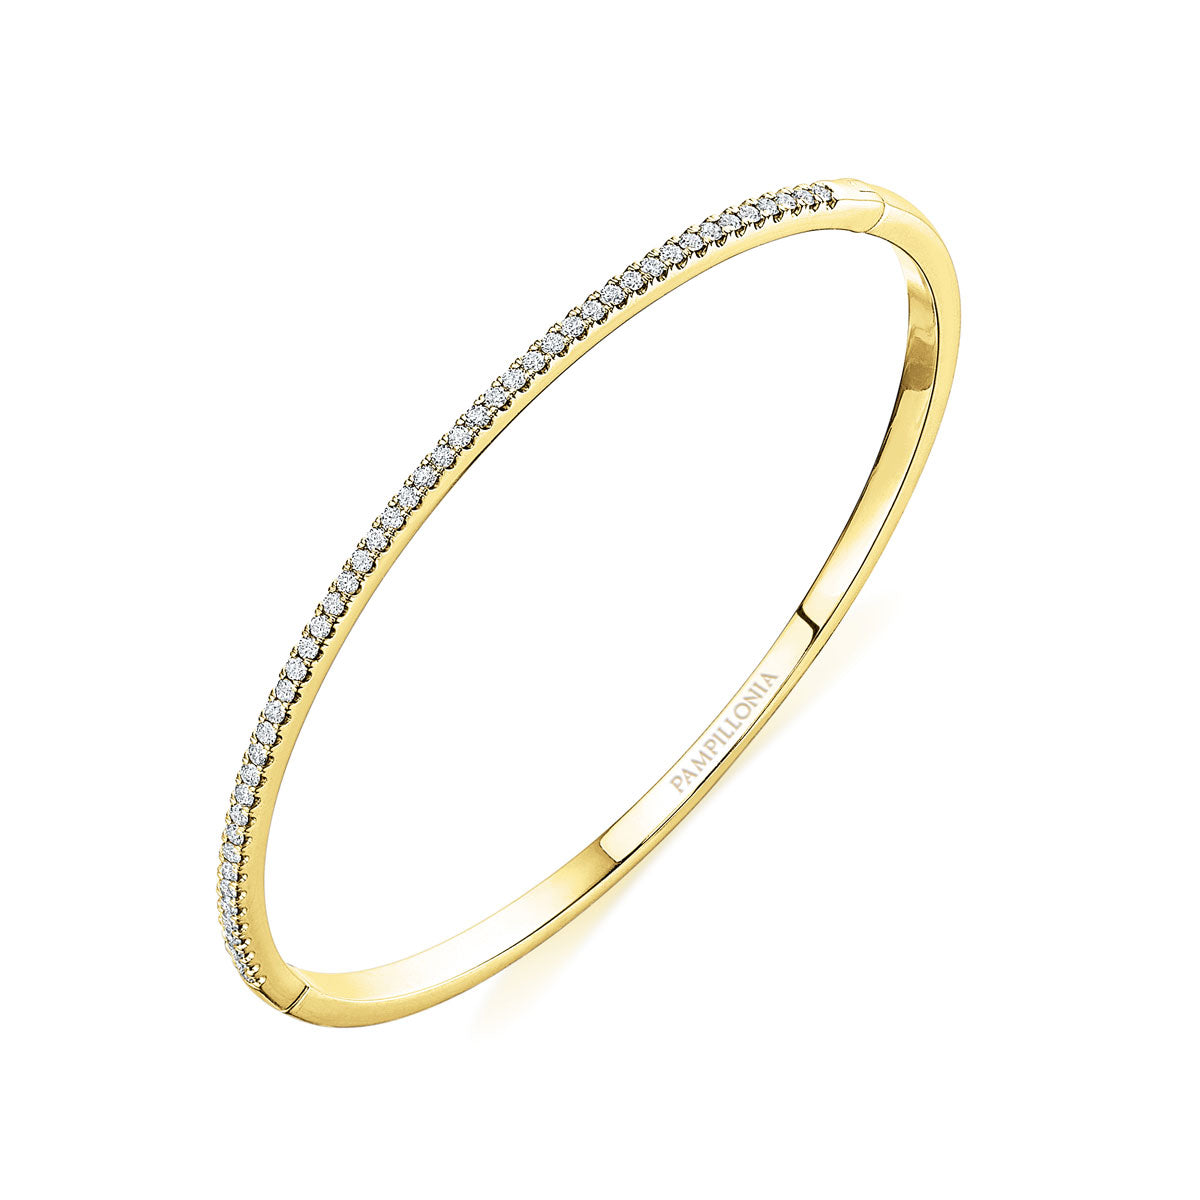 6 - 6.5" / .55CTS / 18K Yellow Gold